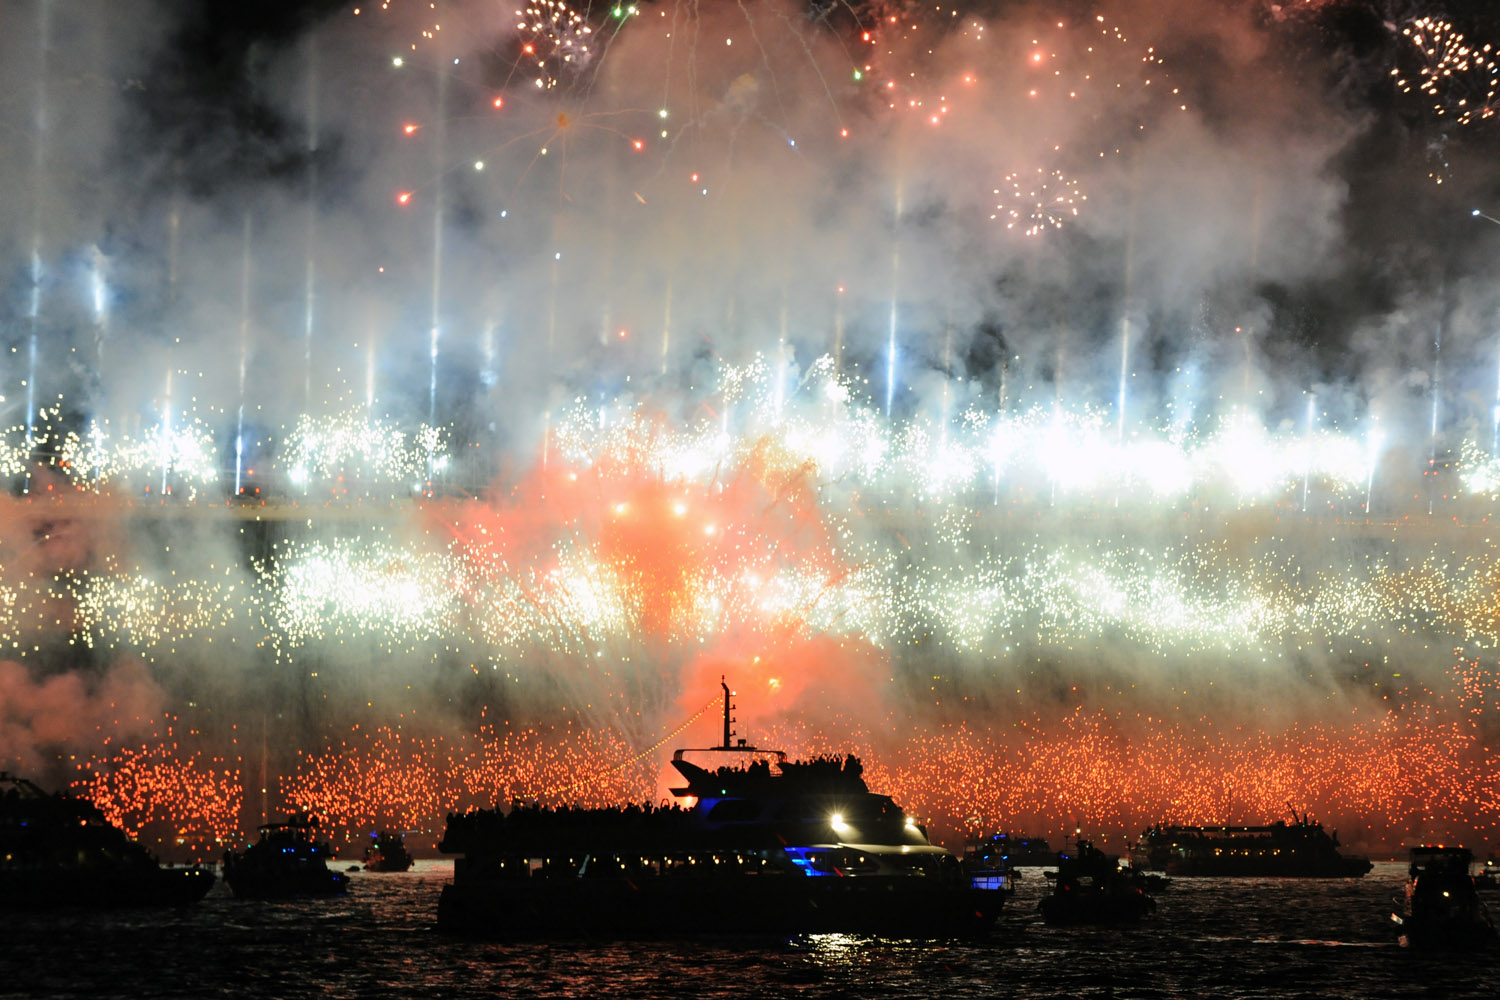 Image: Oct. 29, 2012. Fireworks burst over the Bosphorus bridge in Istanbul during Republic Day, the anniversary of the declaration of the Turkish Republic.